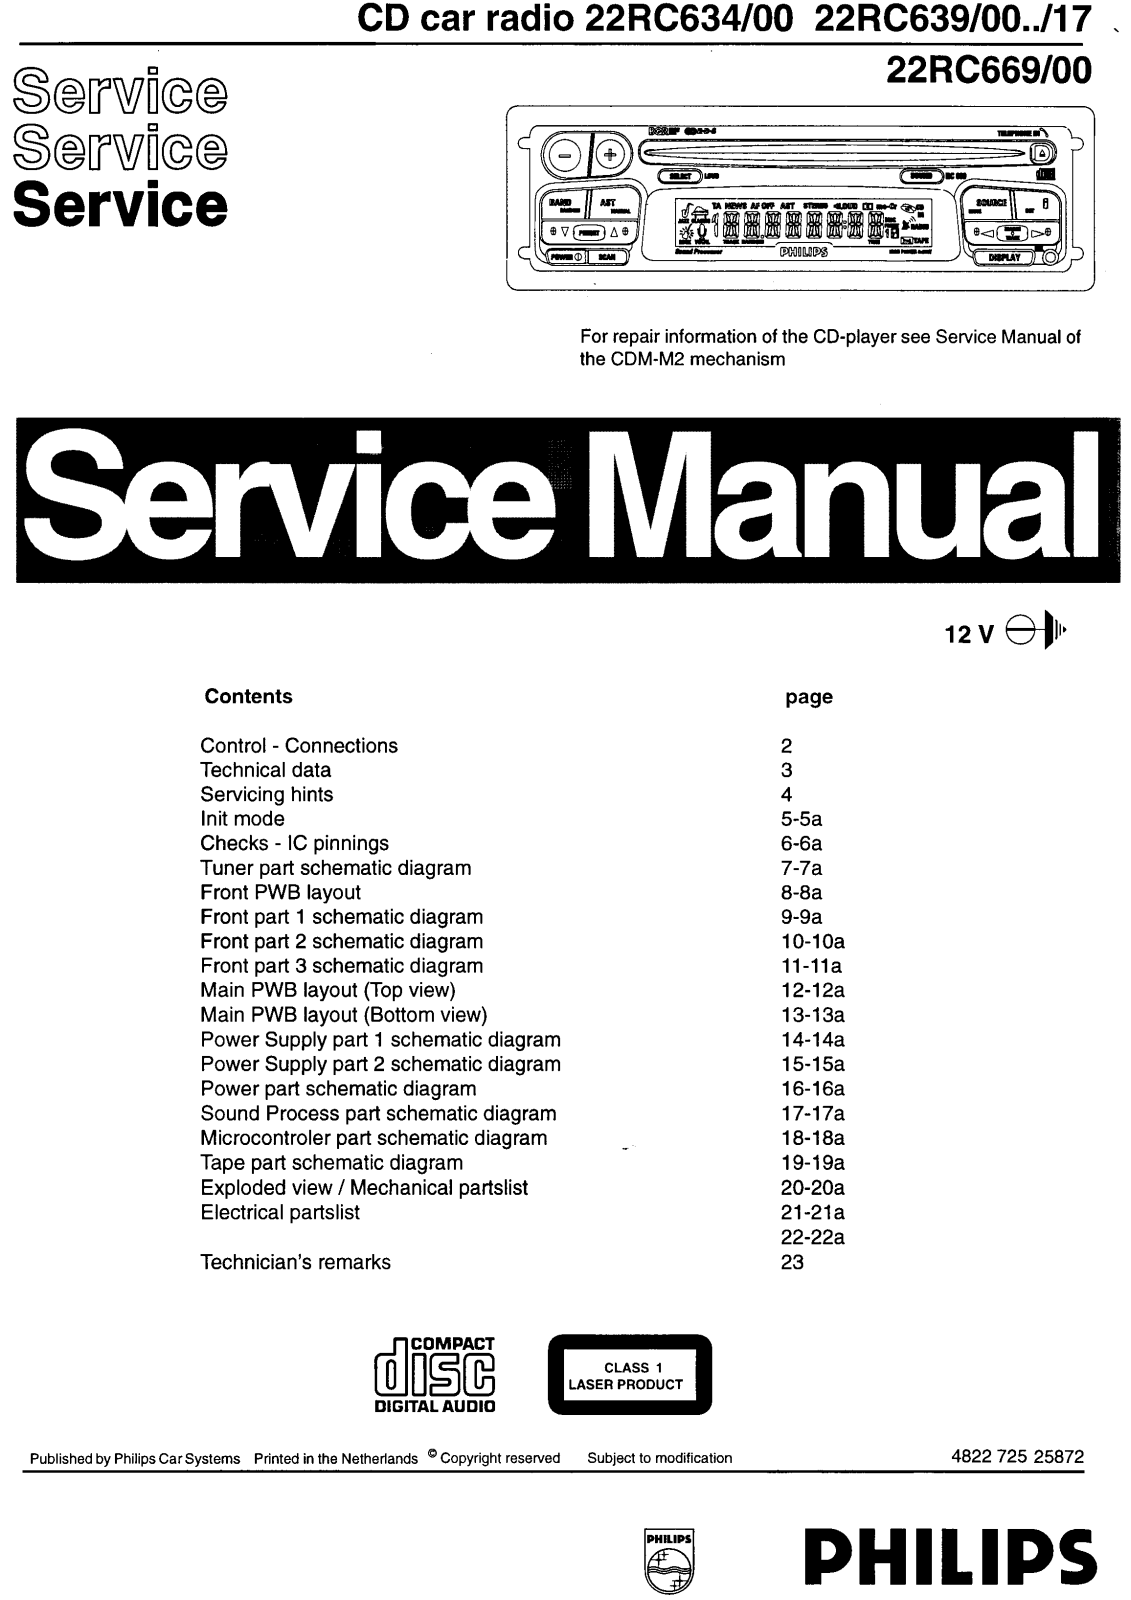 PHILIPS 22RC634-00, 22RC639-00, 22RC669-00 Service Manual